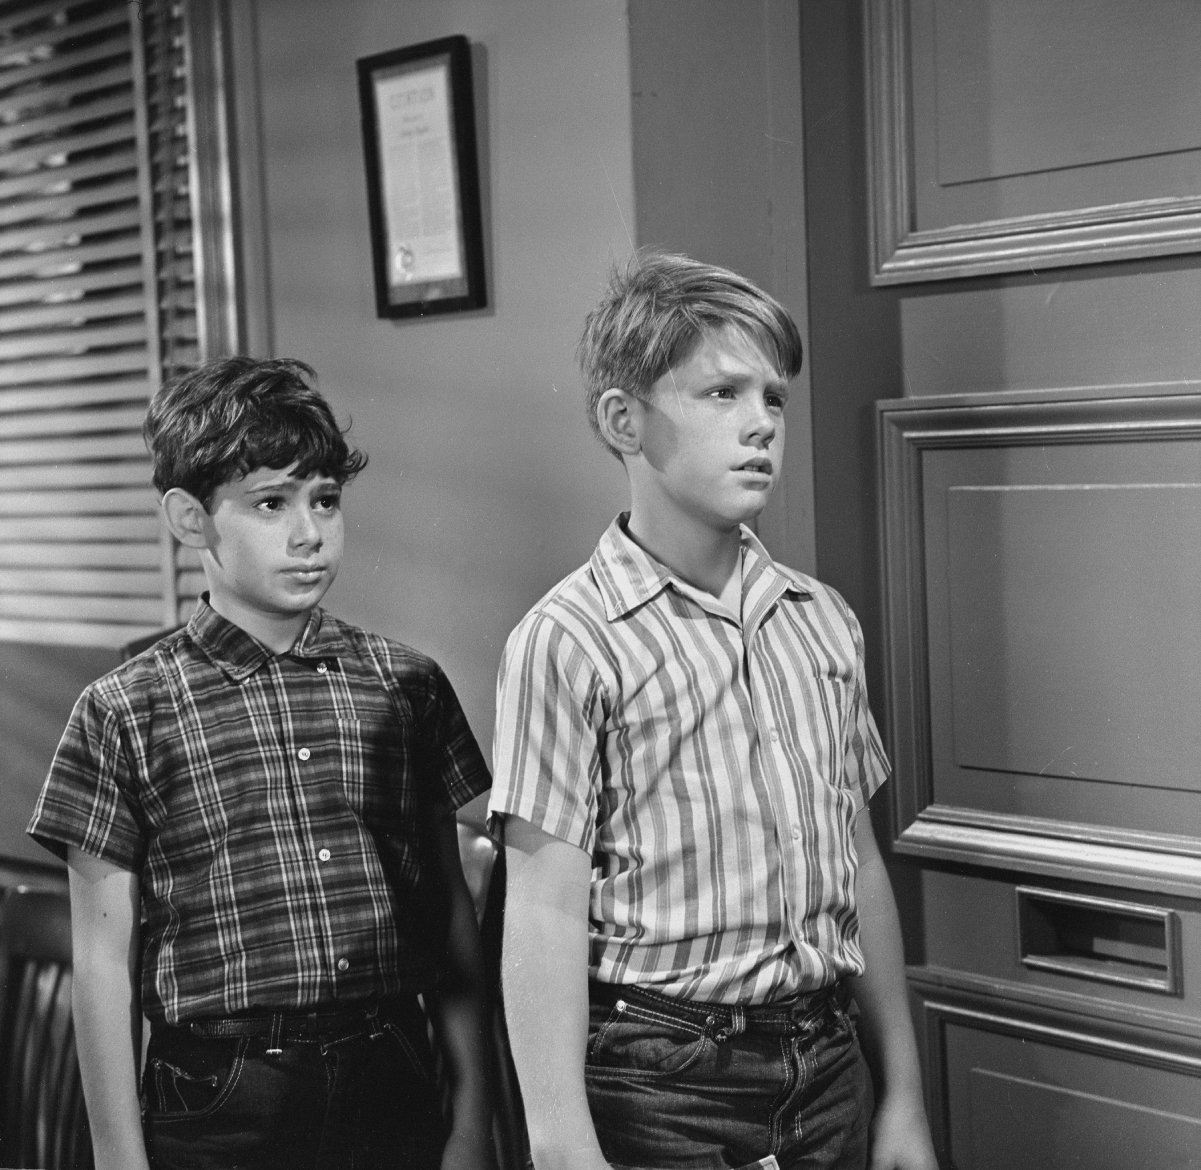 Sheldon Golomb as Arnold, left, and Ron Howard as Opie in a scene from 'The Andy Griffith Show'